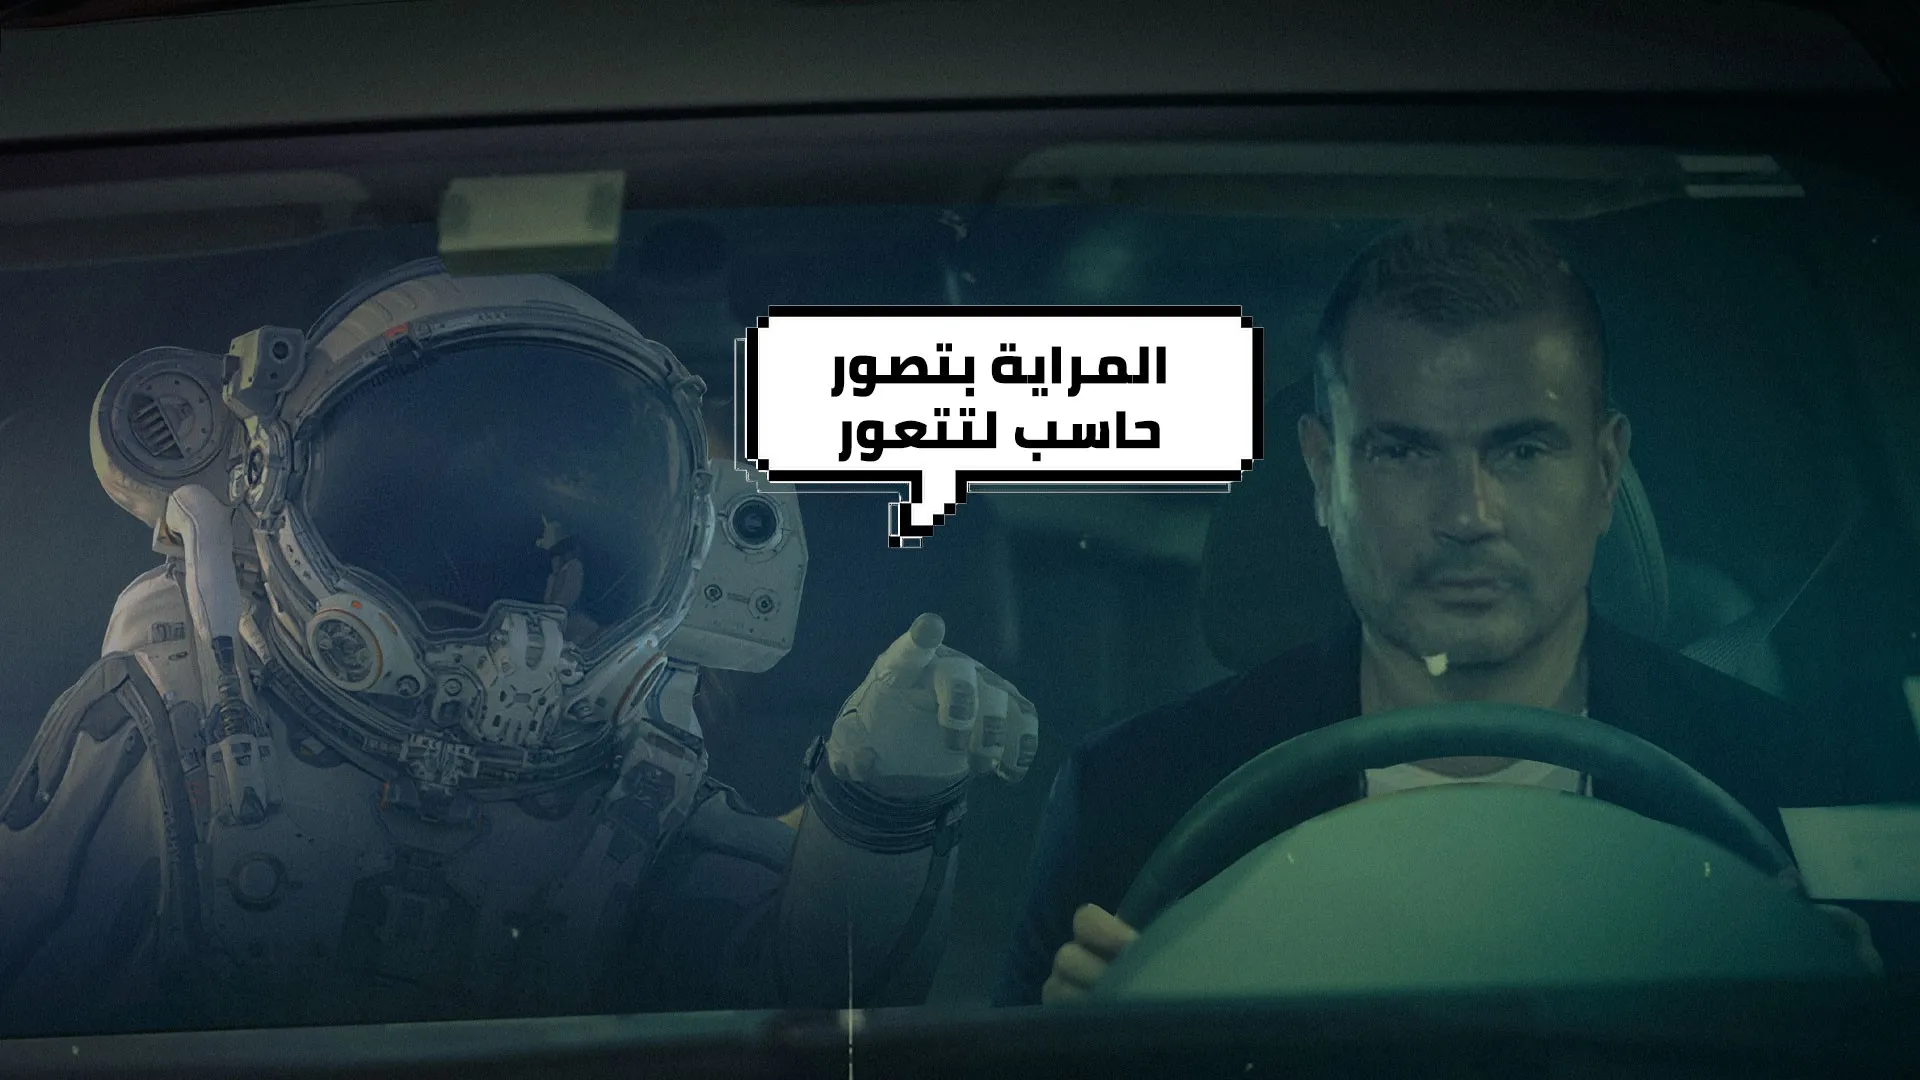 The Most Common Marketing Mistakes to Avoid Amr diab with Citroën desktop